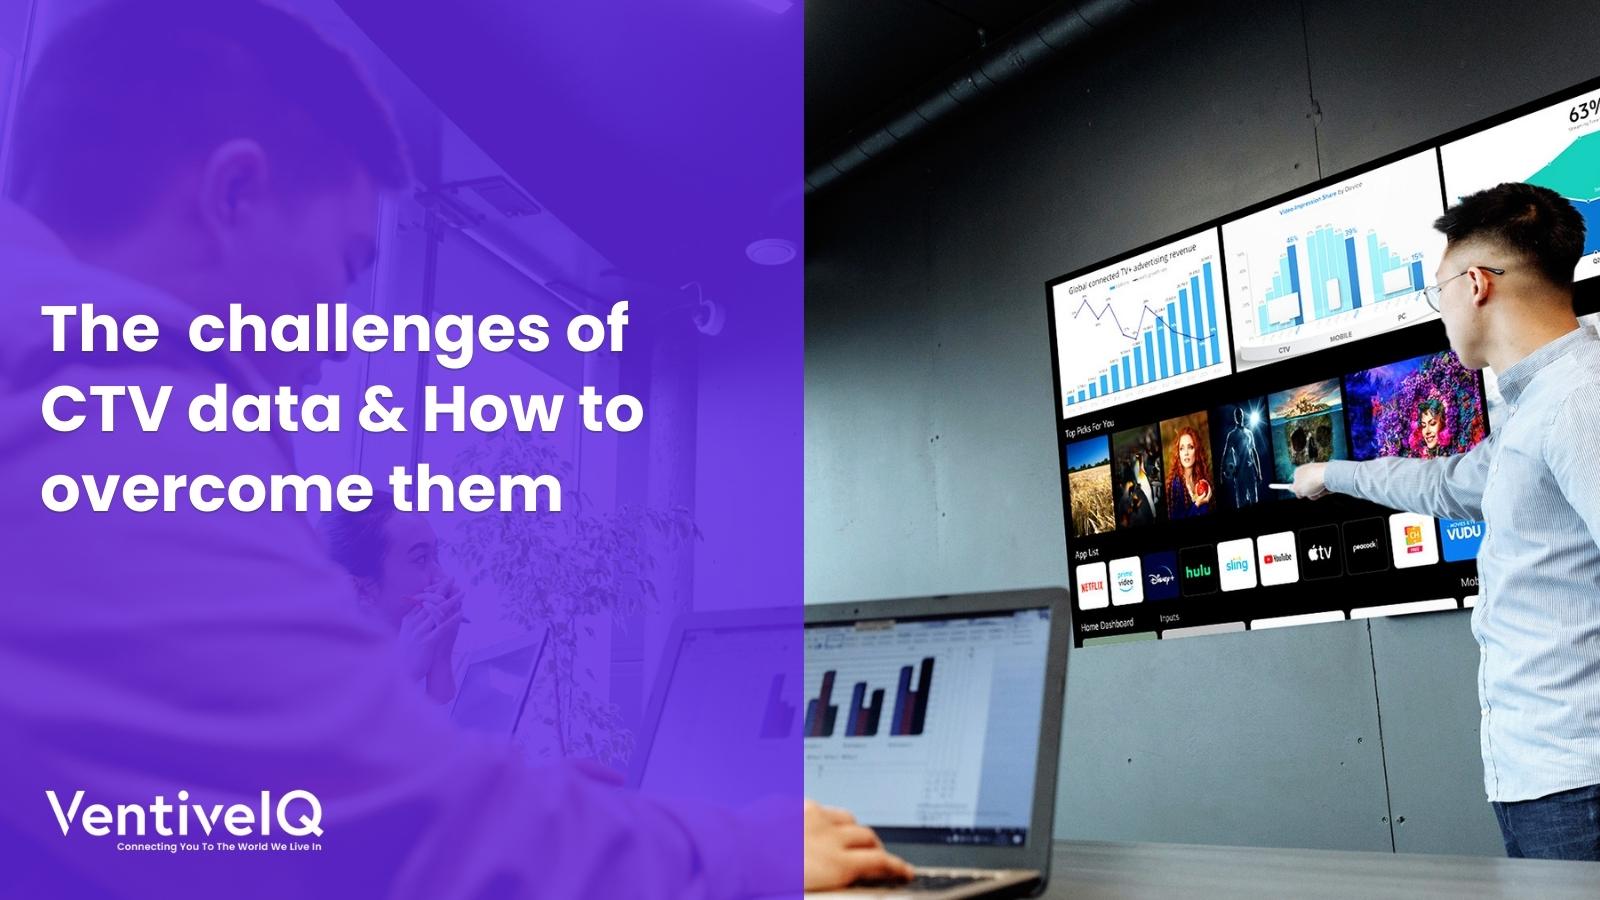 The challenges of CTV data and how to overcome them